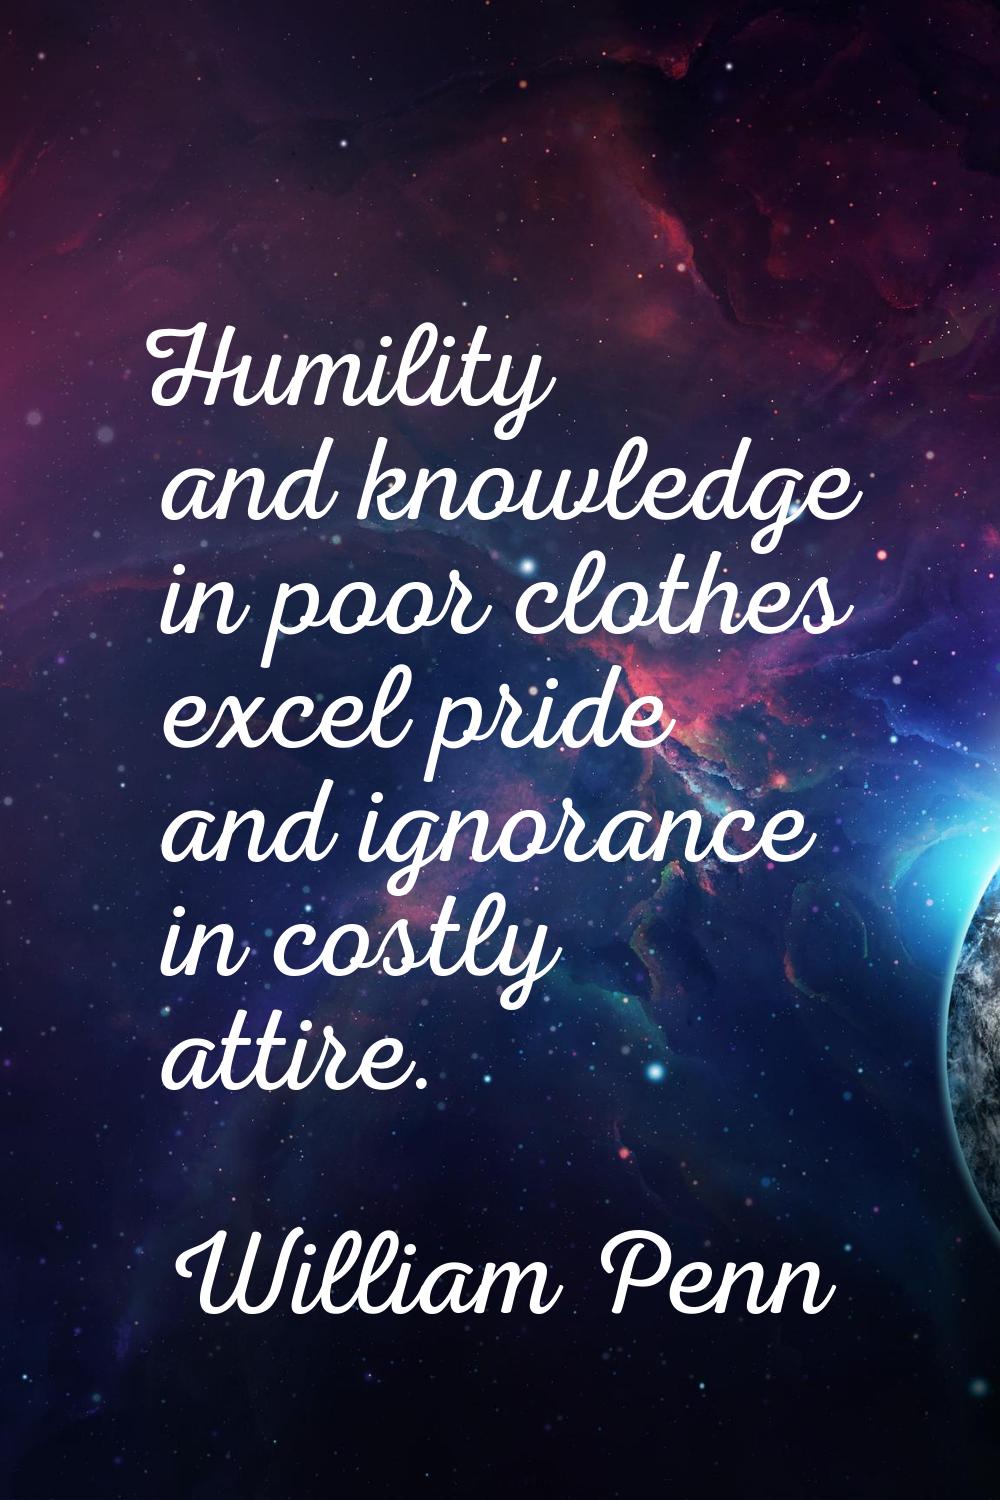 Humility and knowledge in poor clothes excel pride and ignorance in costly attire.